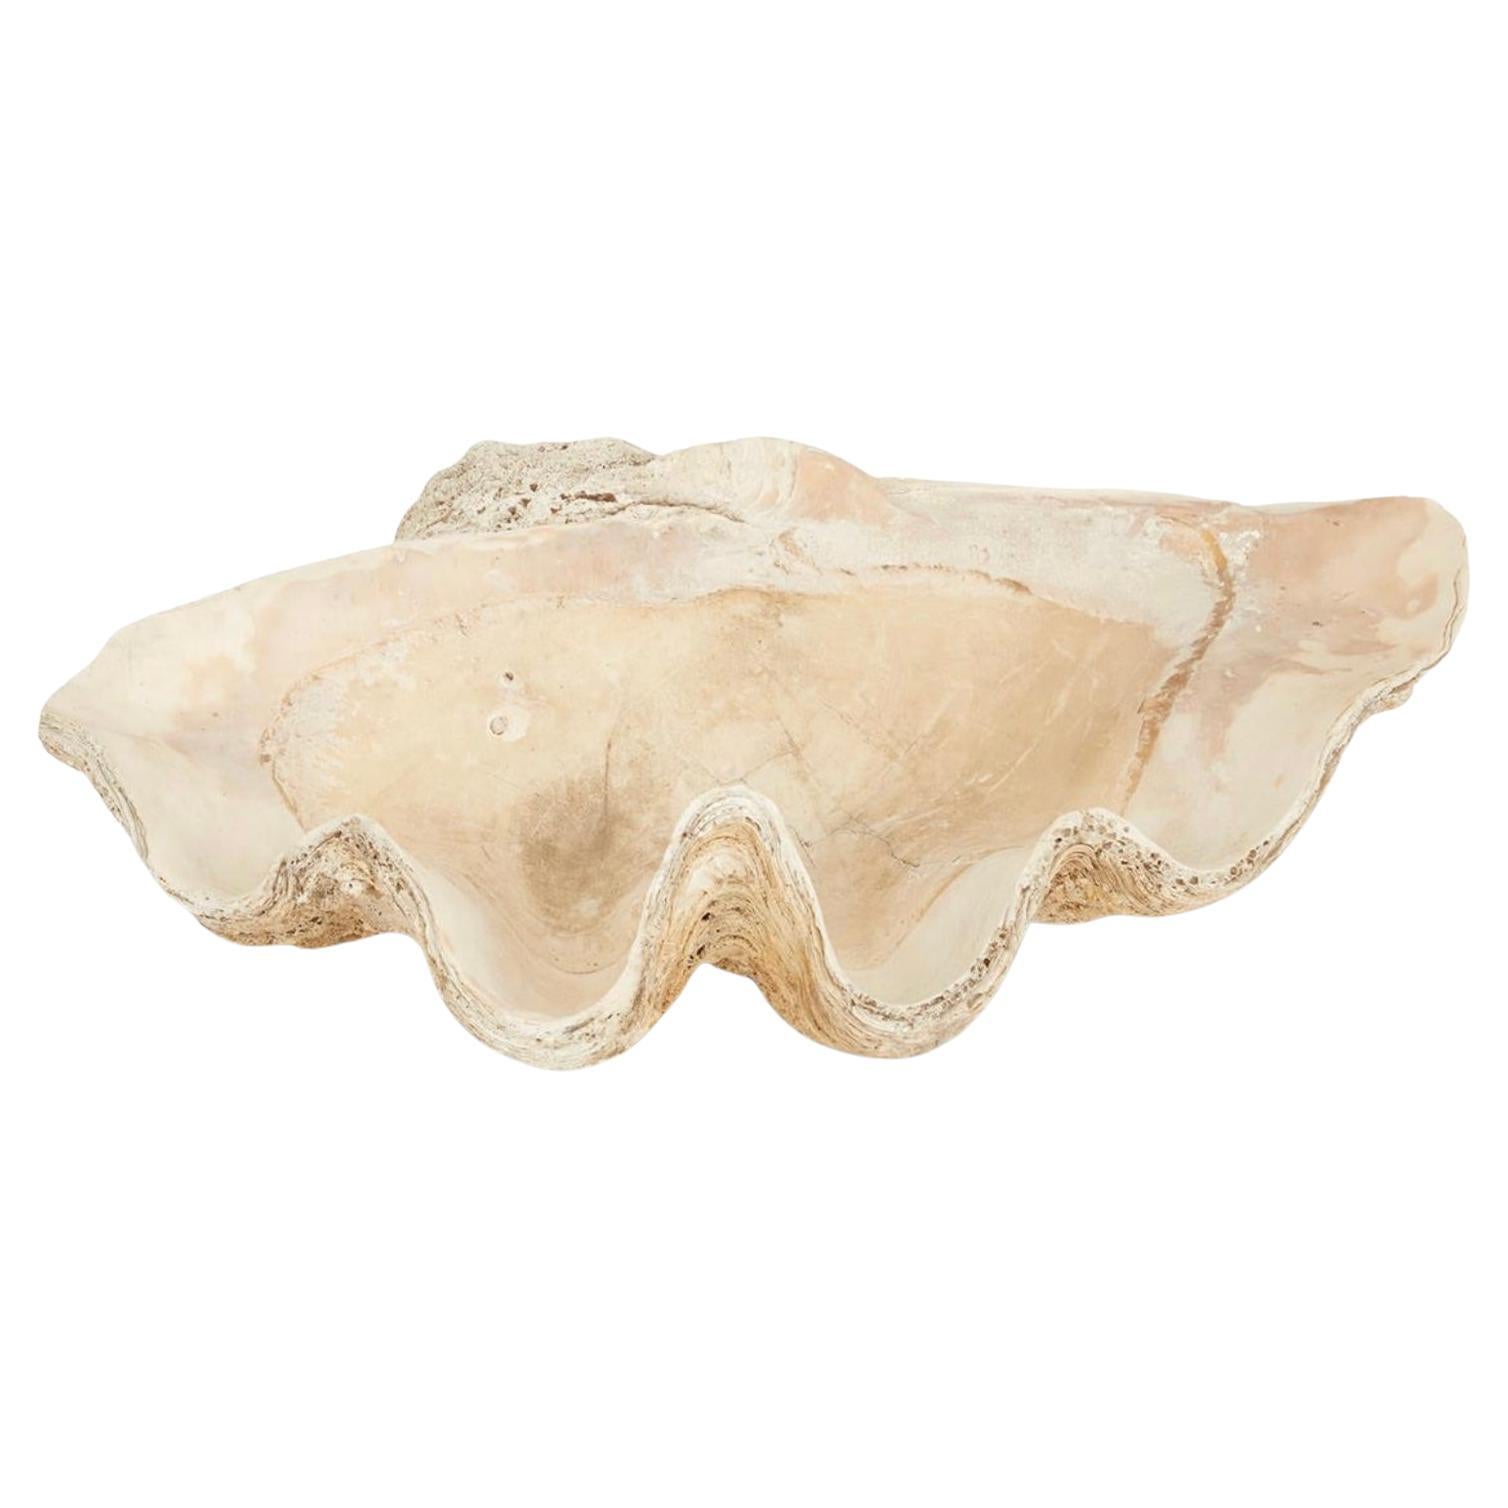 Giant 34 Inch Fossilized Clam Shell For Sale